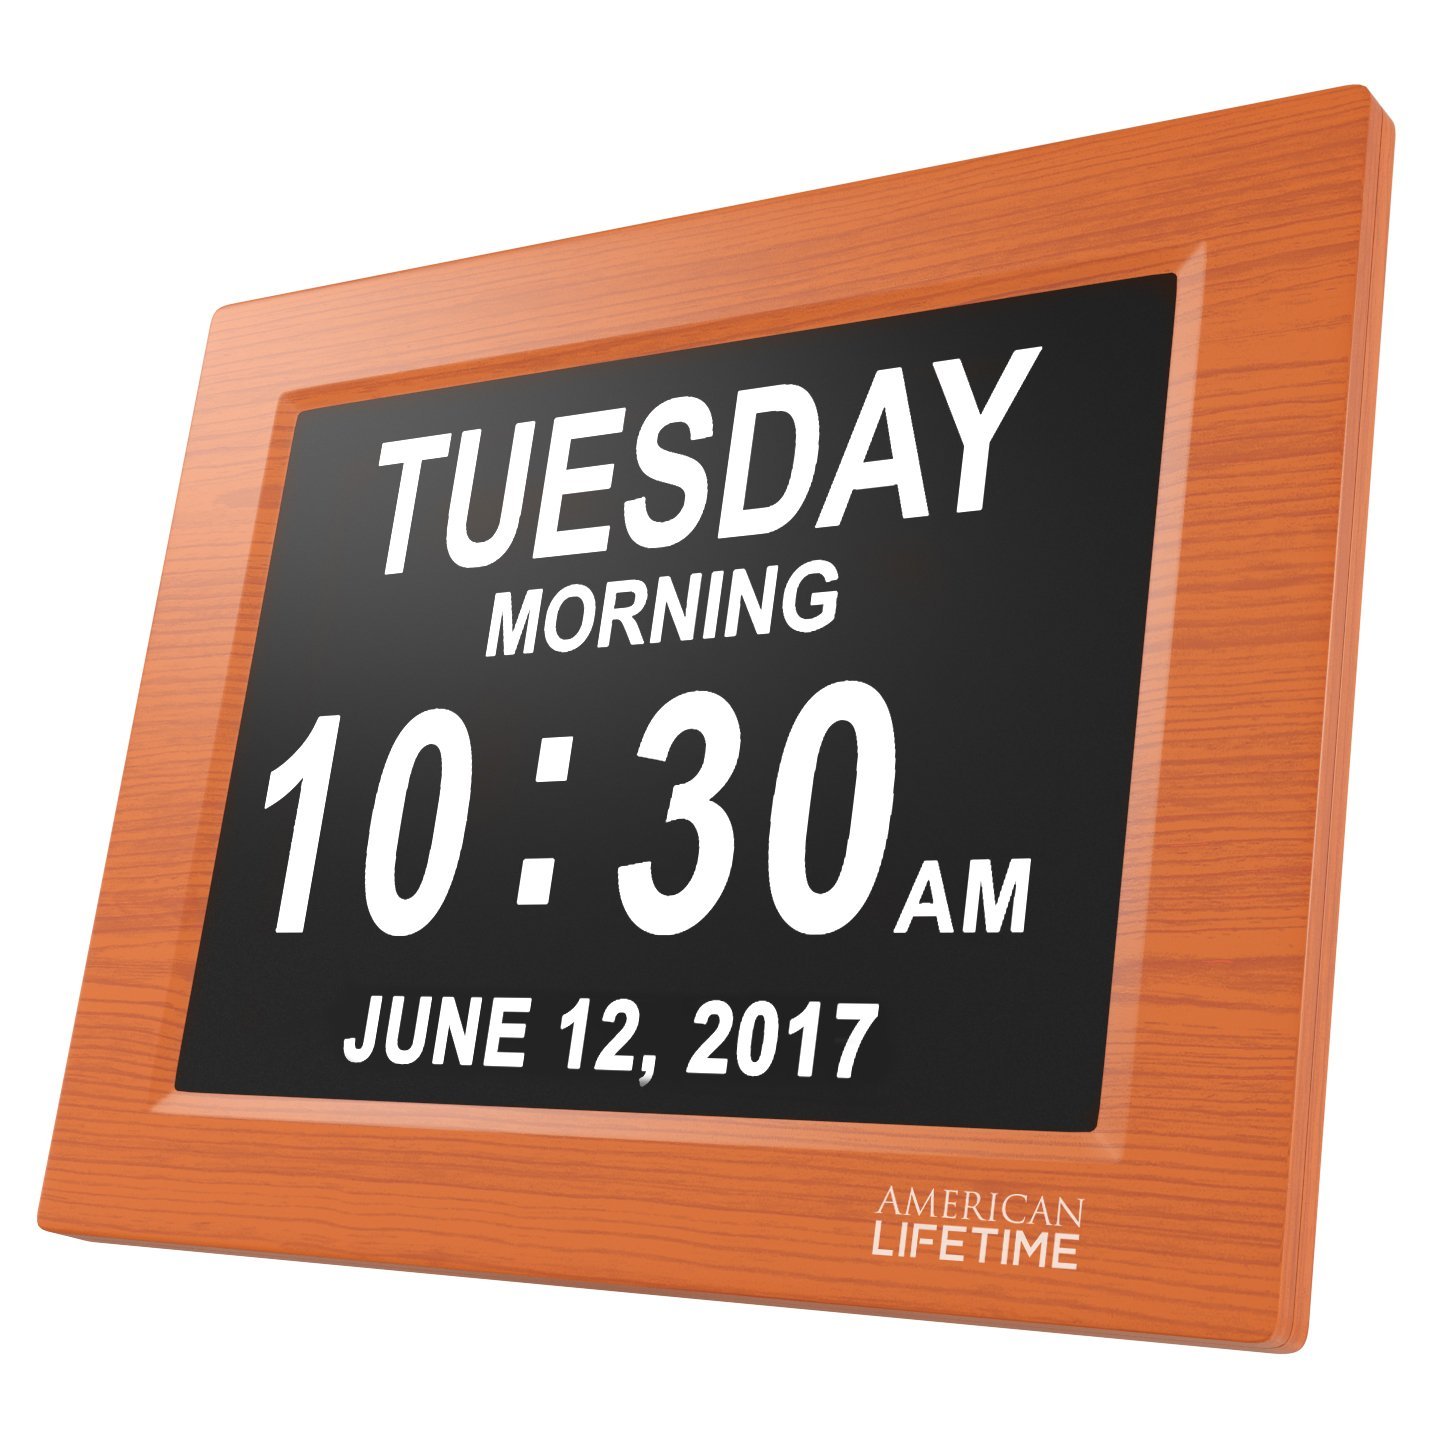 [Newest Version] Day Clock - Extra Large Impaired Vision Digital Clock with Battery Backup & 5 Alarm Options (Brown Wood Color)